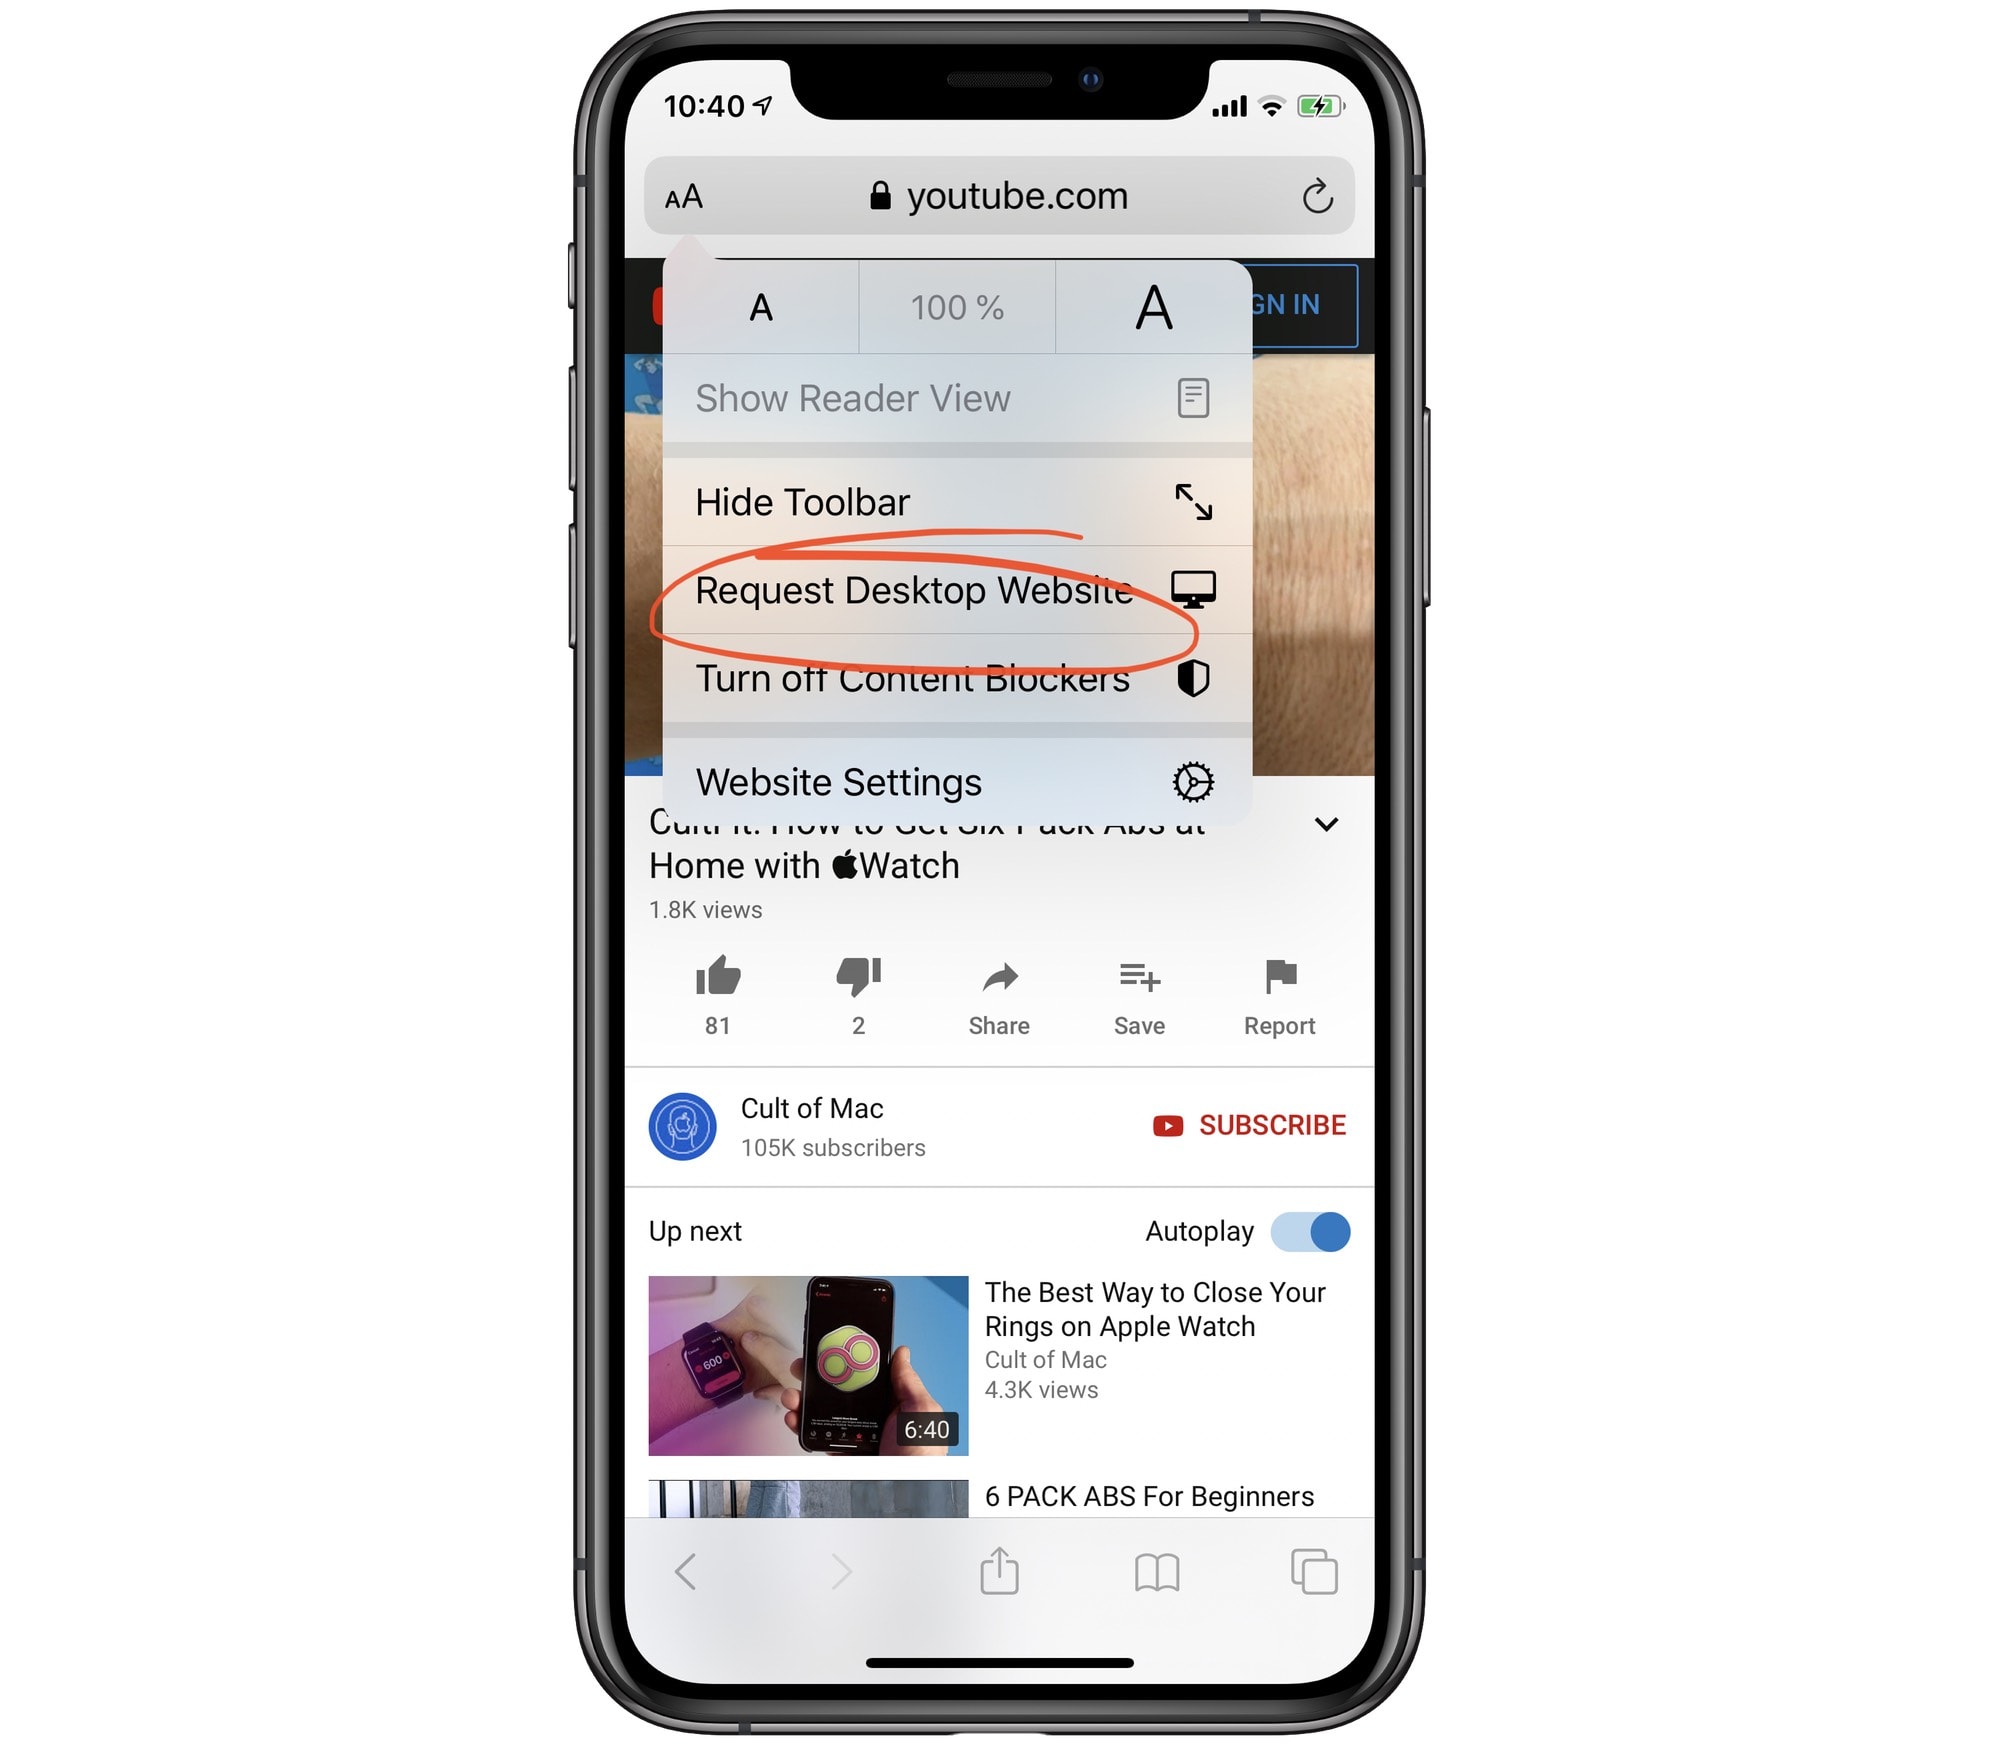 How to listen to YouTube music in the background on iPhone | Cult of Mac